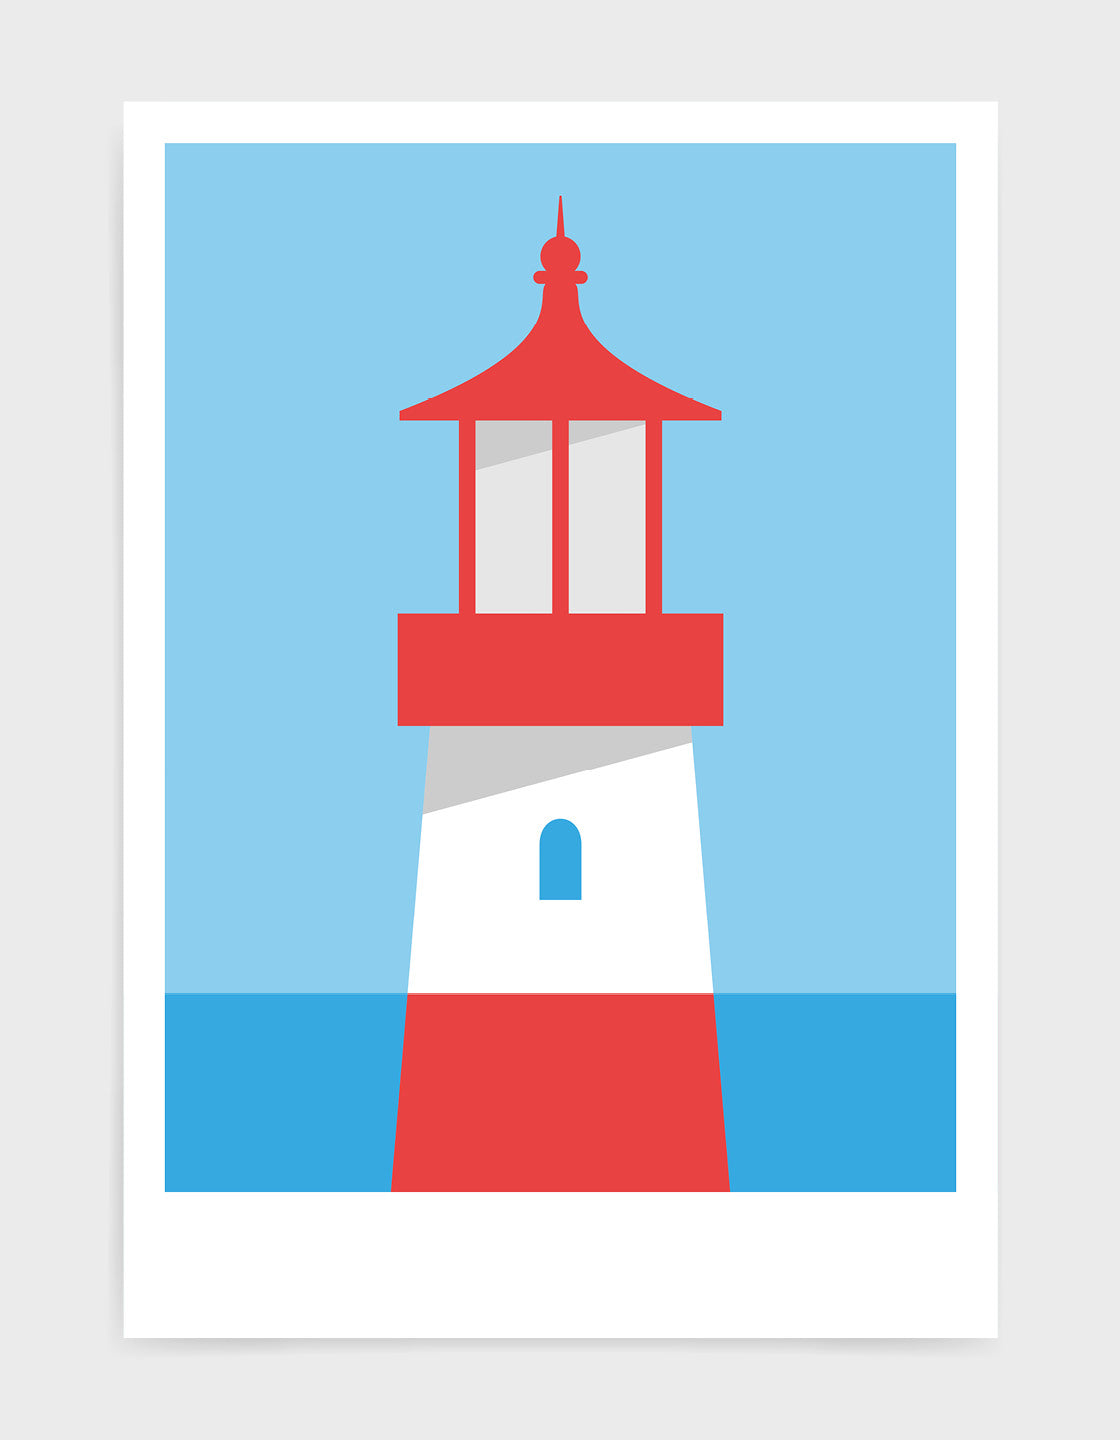 Image of the red and white lighthouse by itself